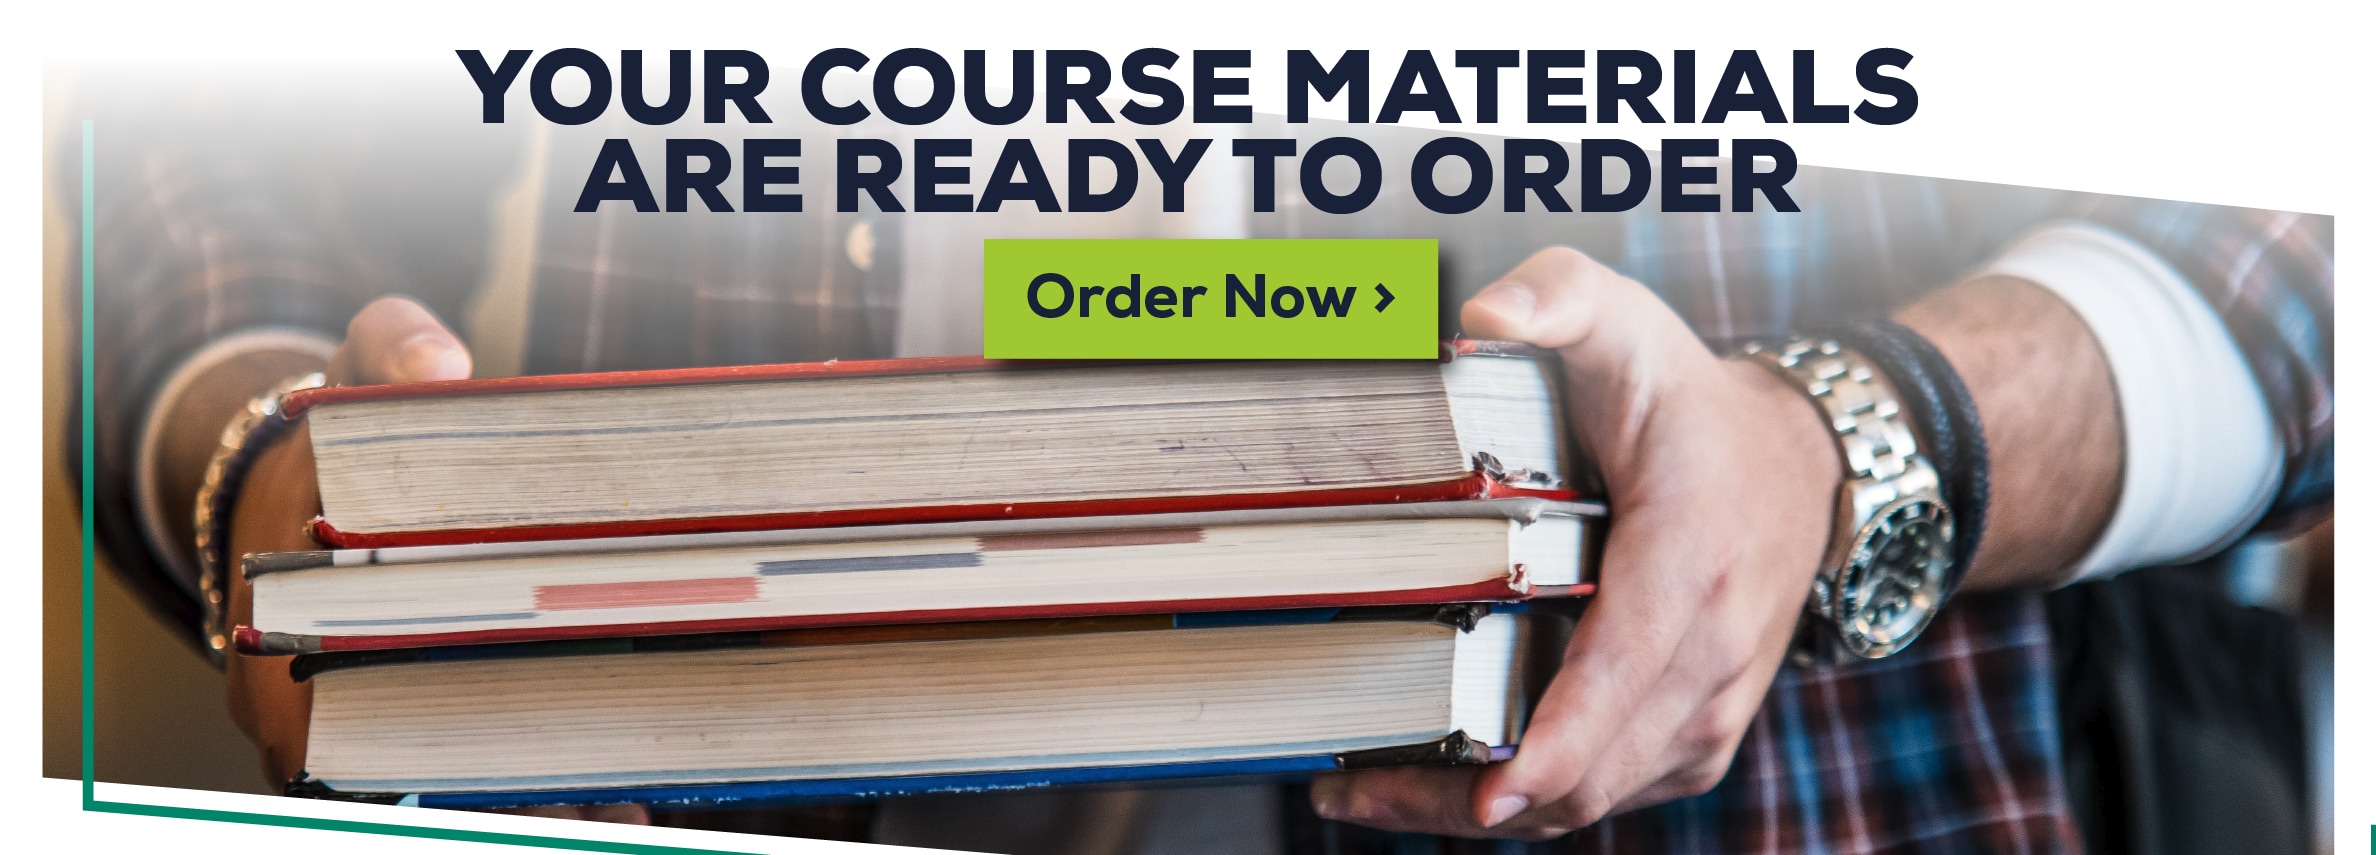 Right books. Right price. Flexible shipping options.* Order now. *Exclusions may apply.